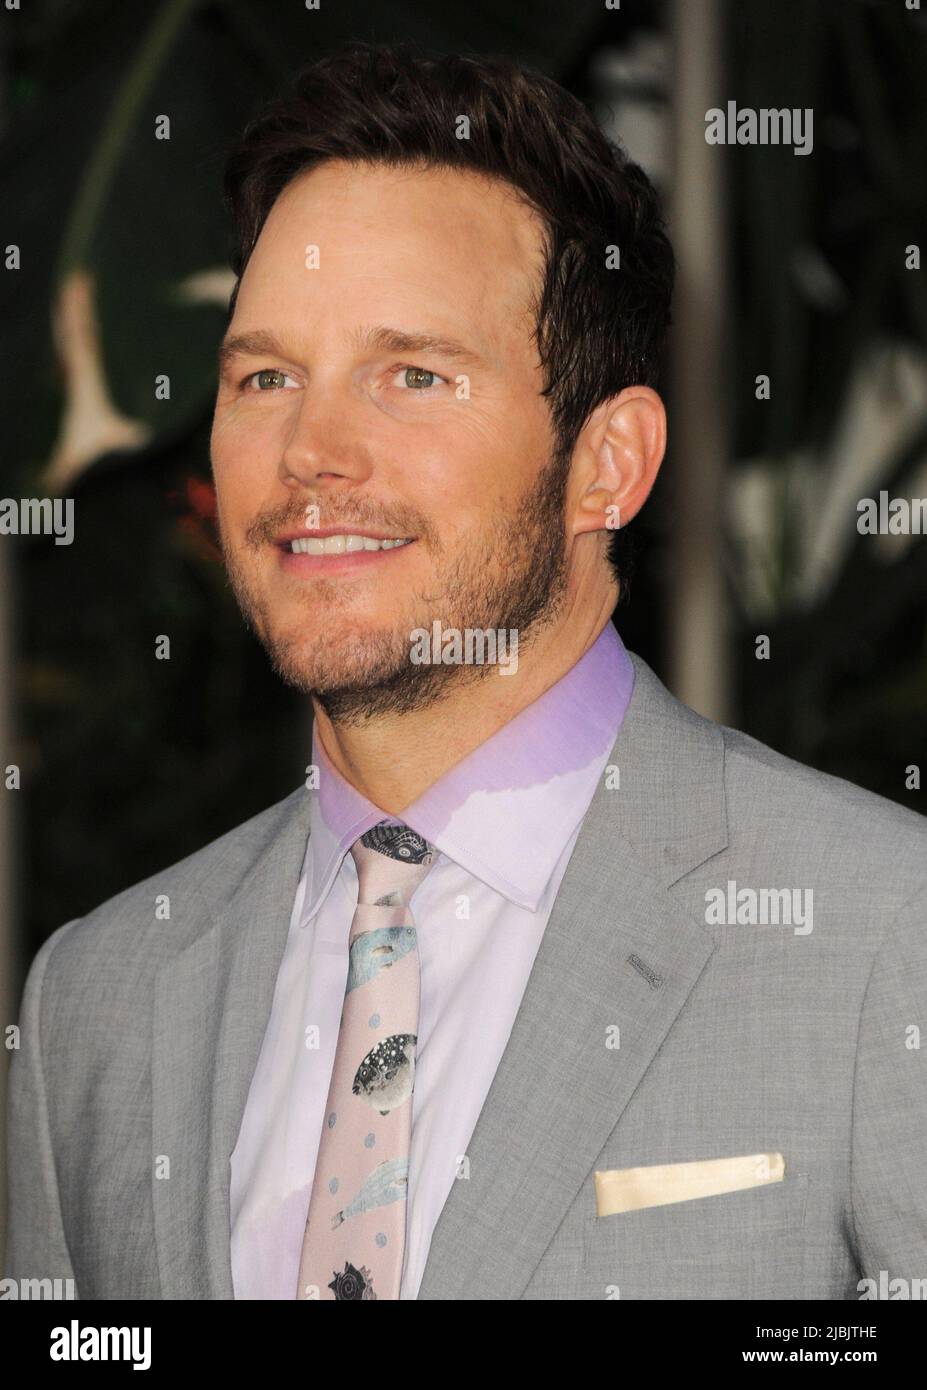 Los Angeles, CA. 6th June, 2022. Chris Pratt at arrivals for JURASSIC WORLD DOMINION Premiere, TCL Chinese Theatre, Los Angeles, CA June 6, 2022. Credit: Elizabeth Goodenough/Everett Collection/Alamy Live News Stock Photo